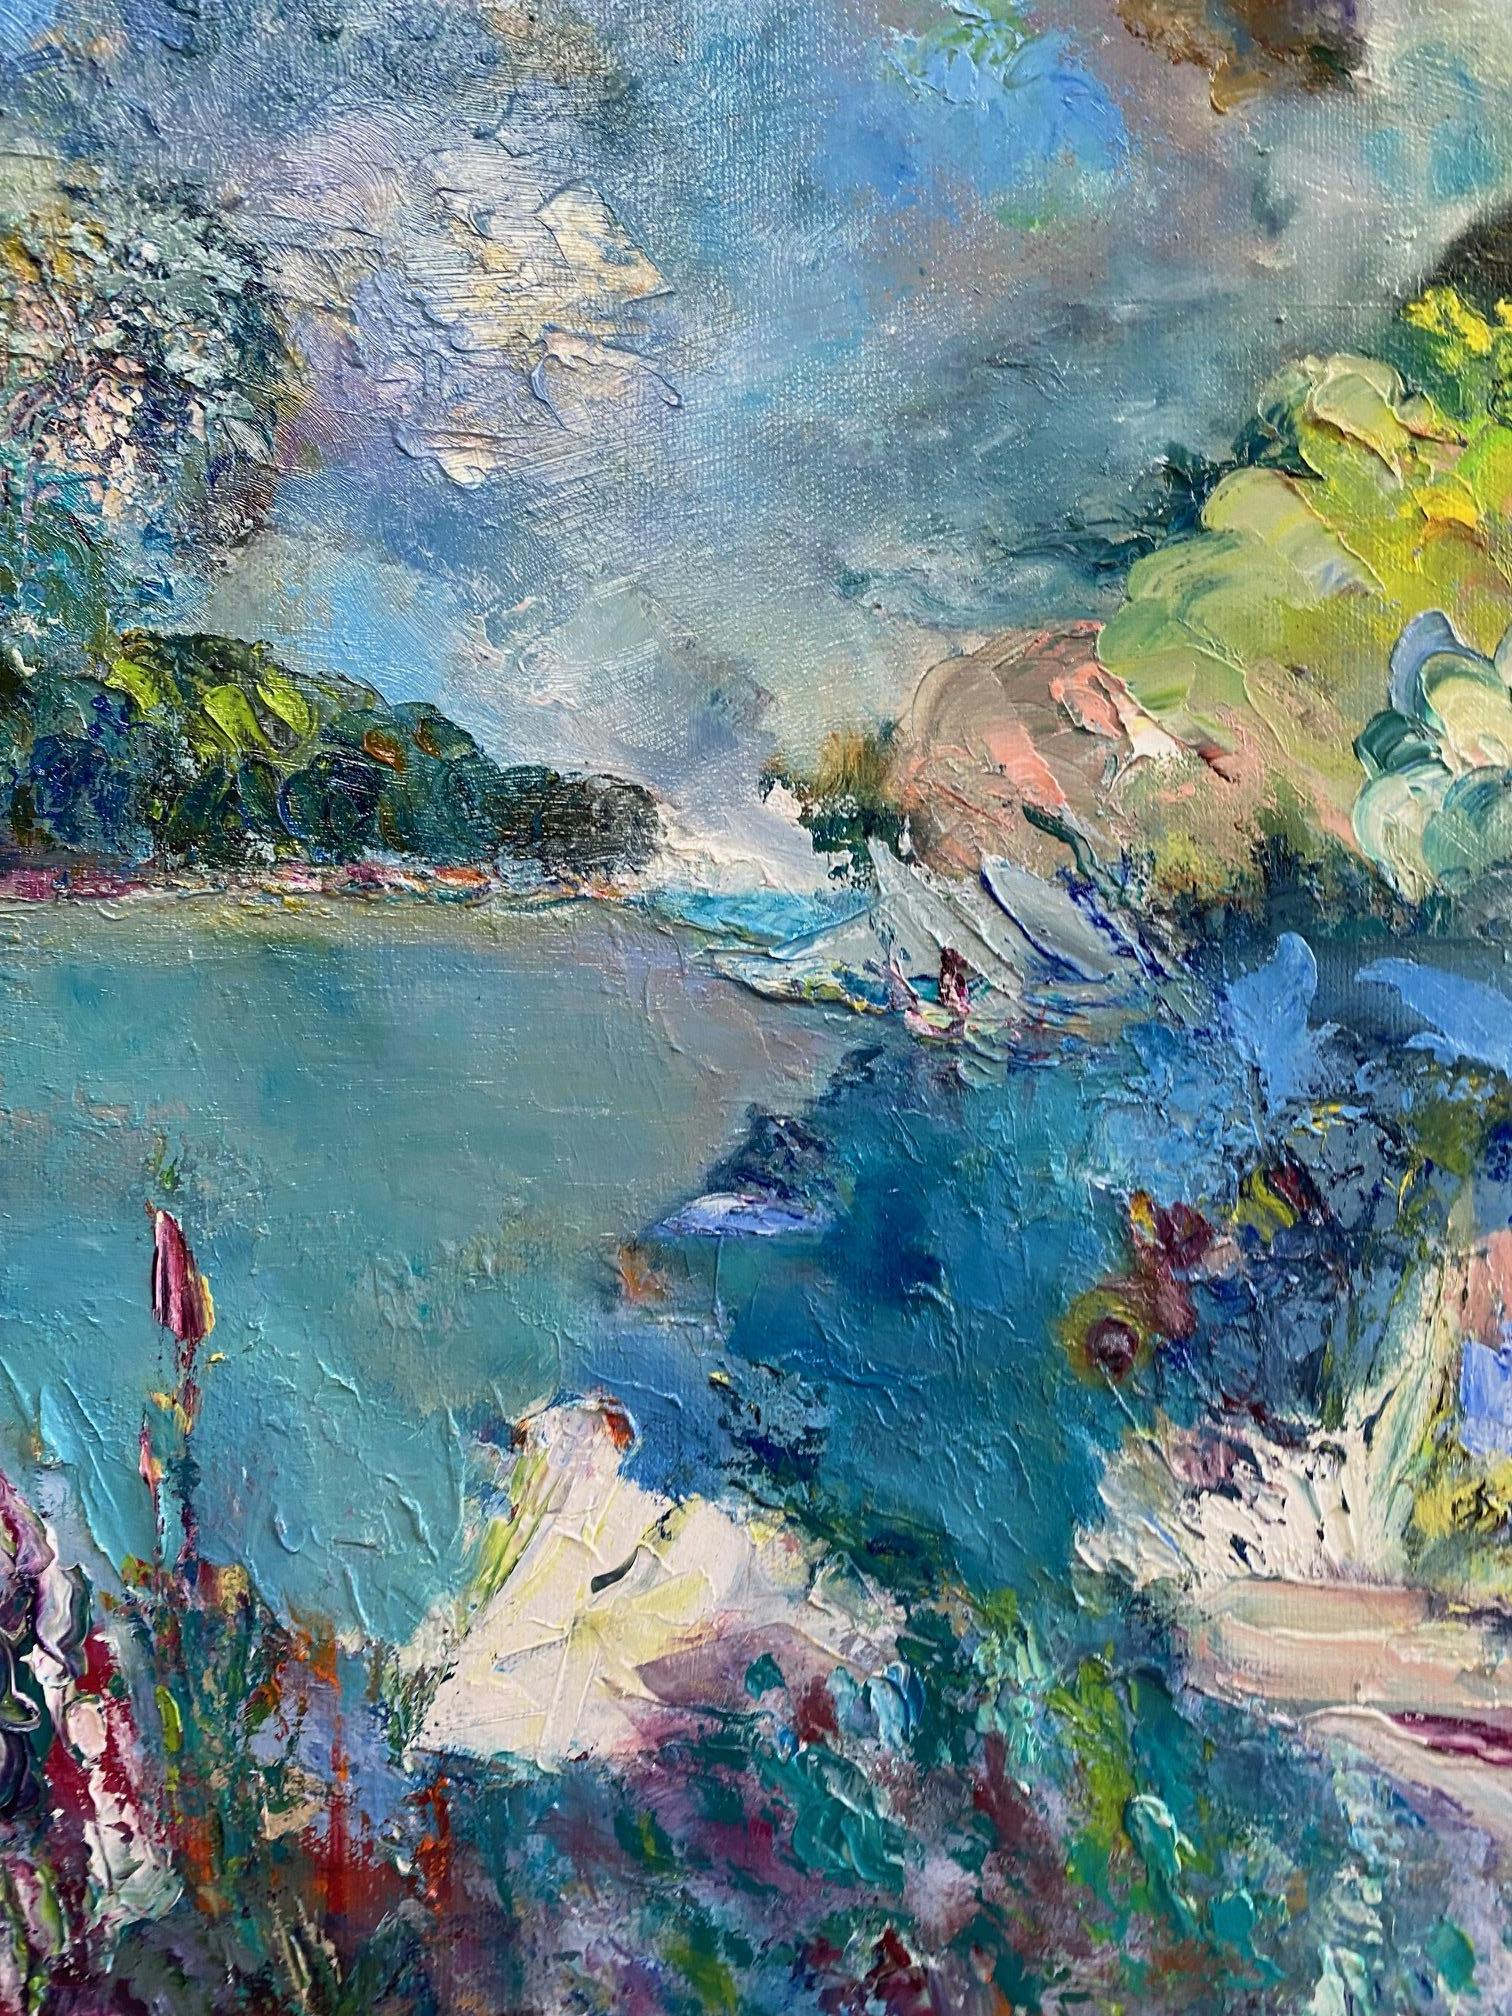 The beauty and mystique of the popular and legendary island of Bermuda is explored in this original abstract expressionist marine landscape.  Stone walls overflowing with magenta bougainvillea and other tropical flowers are intoxicating when coupled